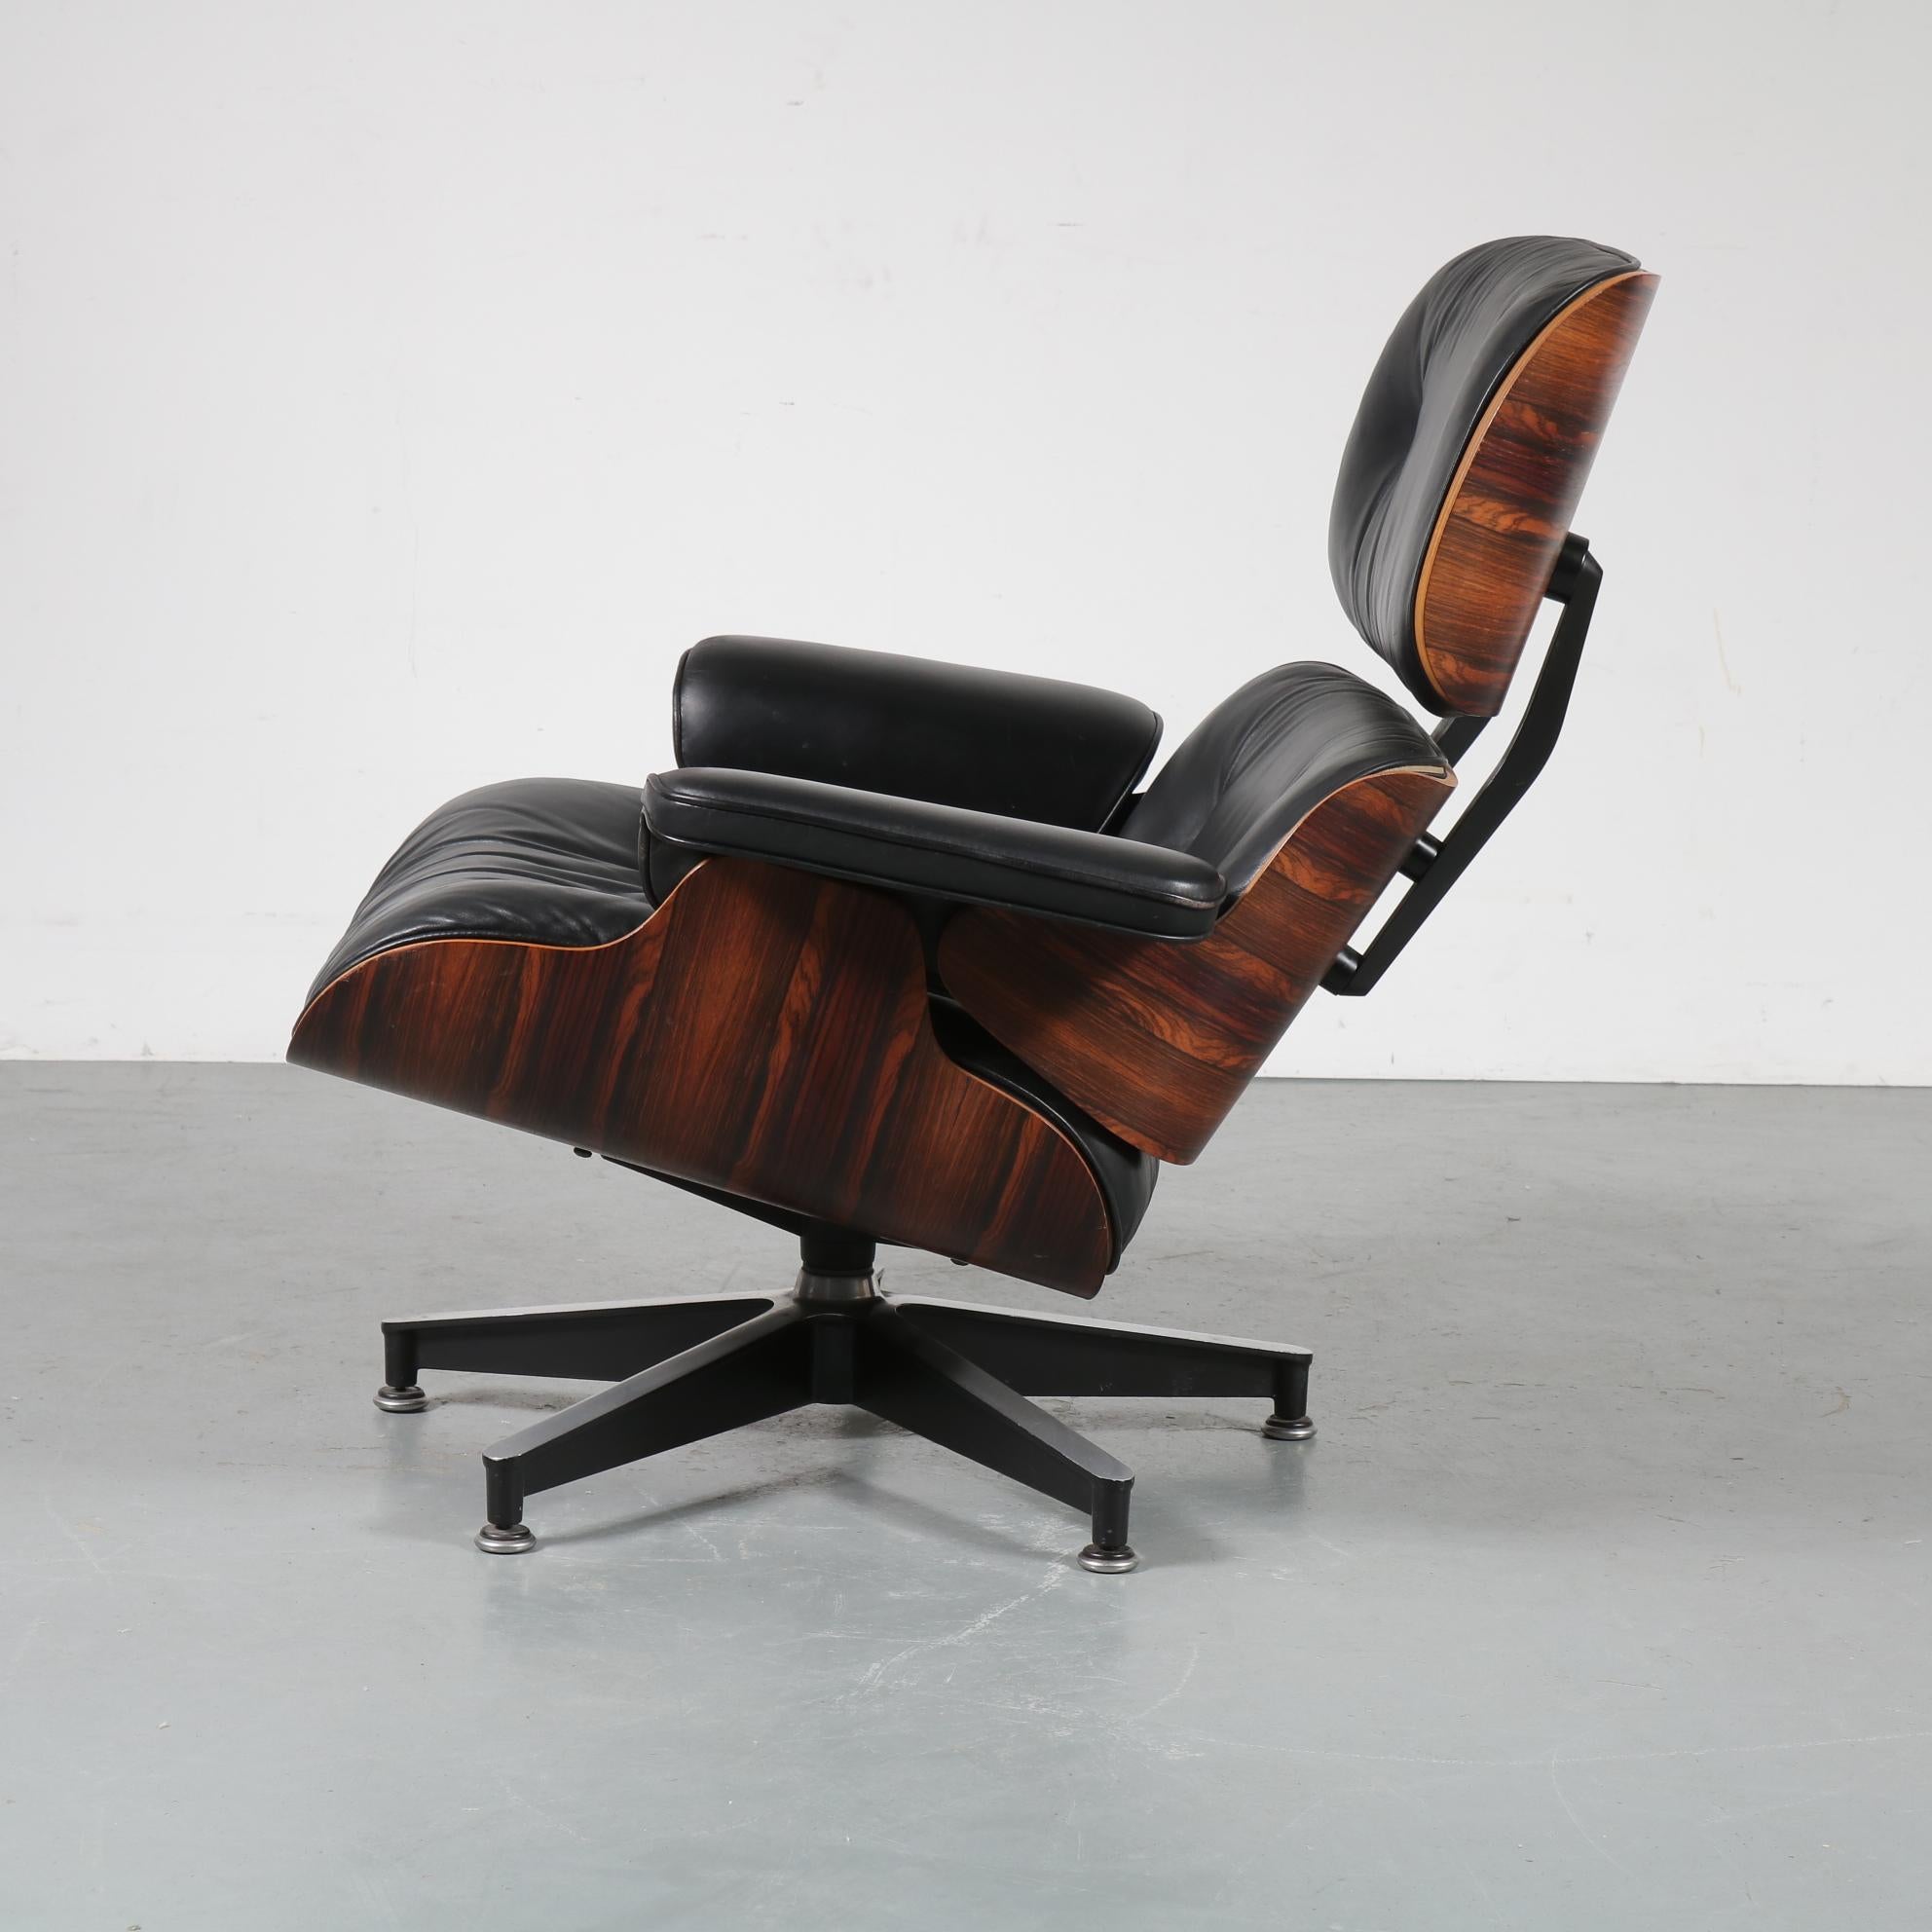 Pair of Charles and Ray Eames Lounge Chairs for Herman Miller, circa 1970 (Leder)